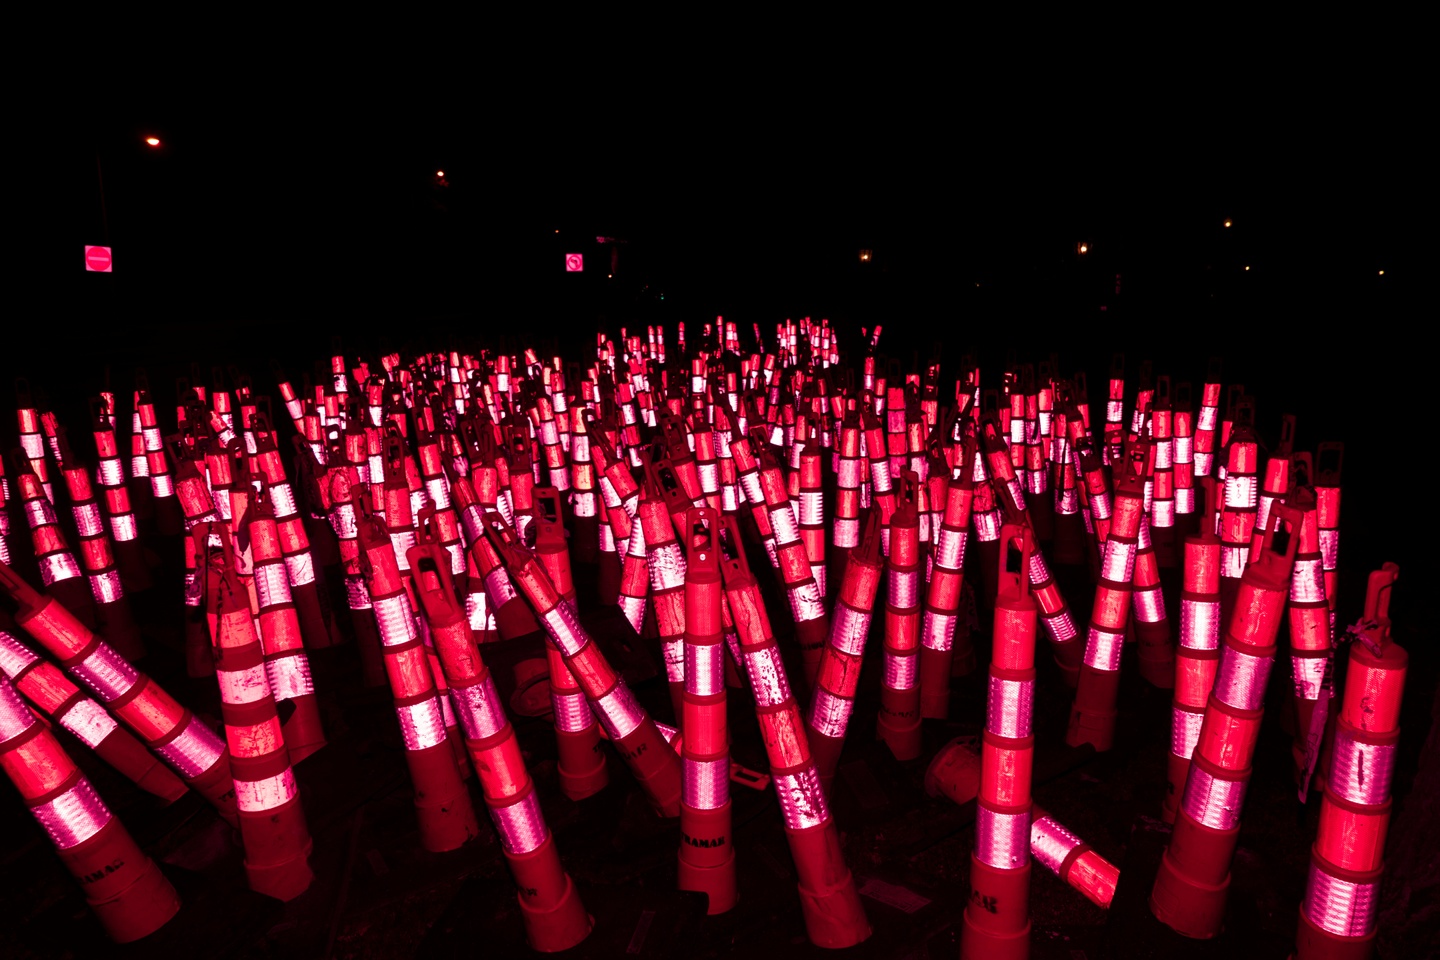 Nighttime photograph of a cluster of hundreds of orange safety cones photographed with a red light, causing the reflective stripes to glow eerily.